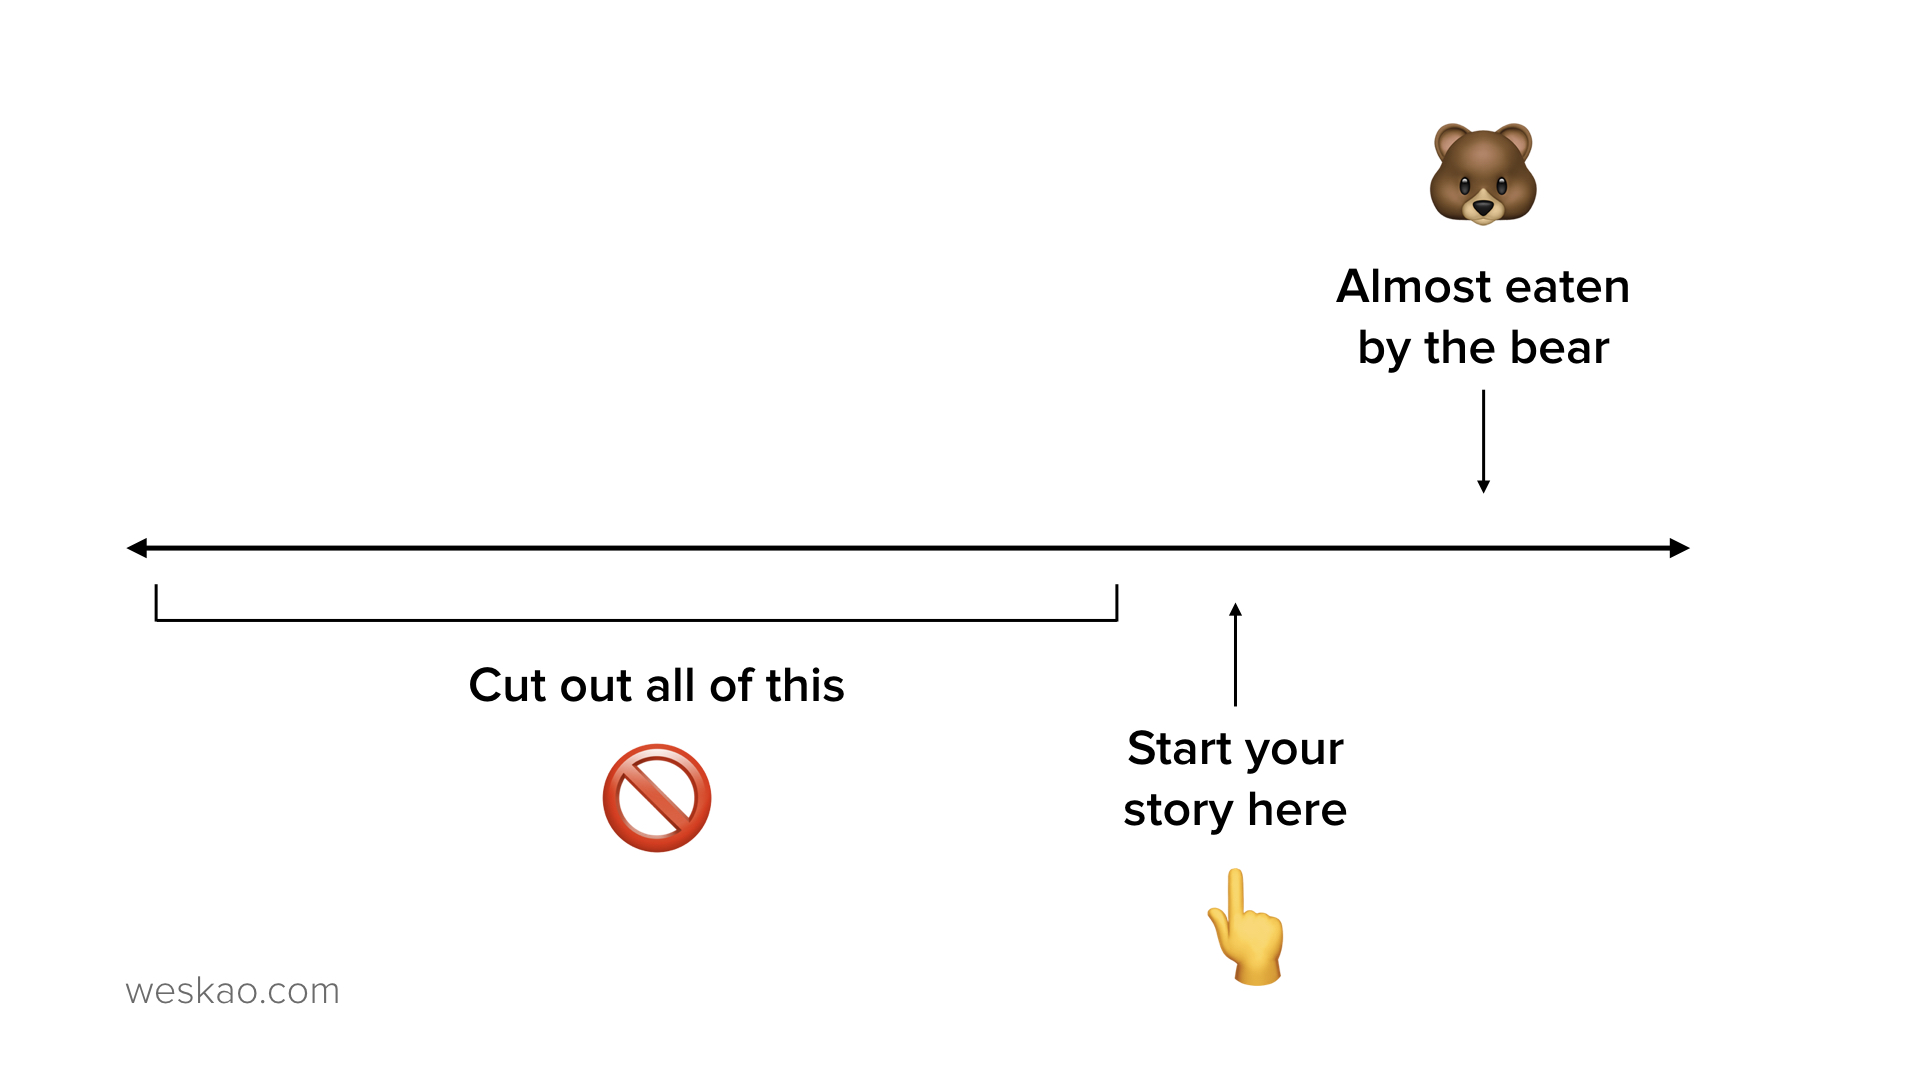 How To Start Your Story